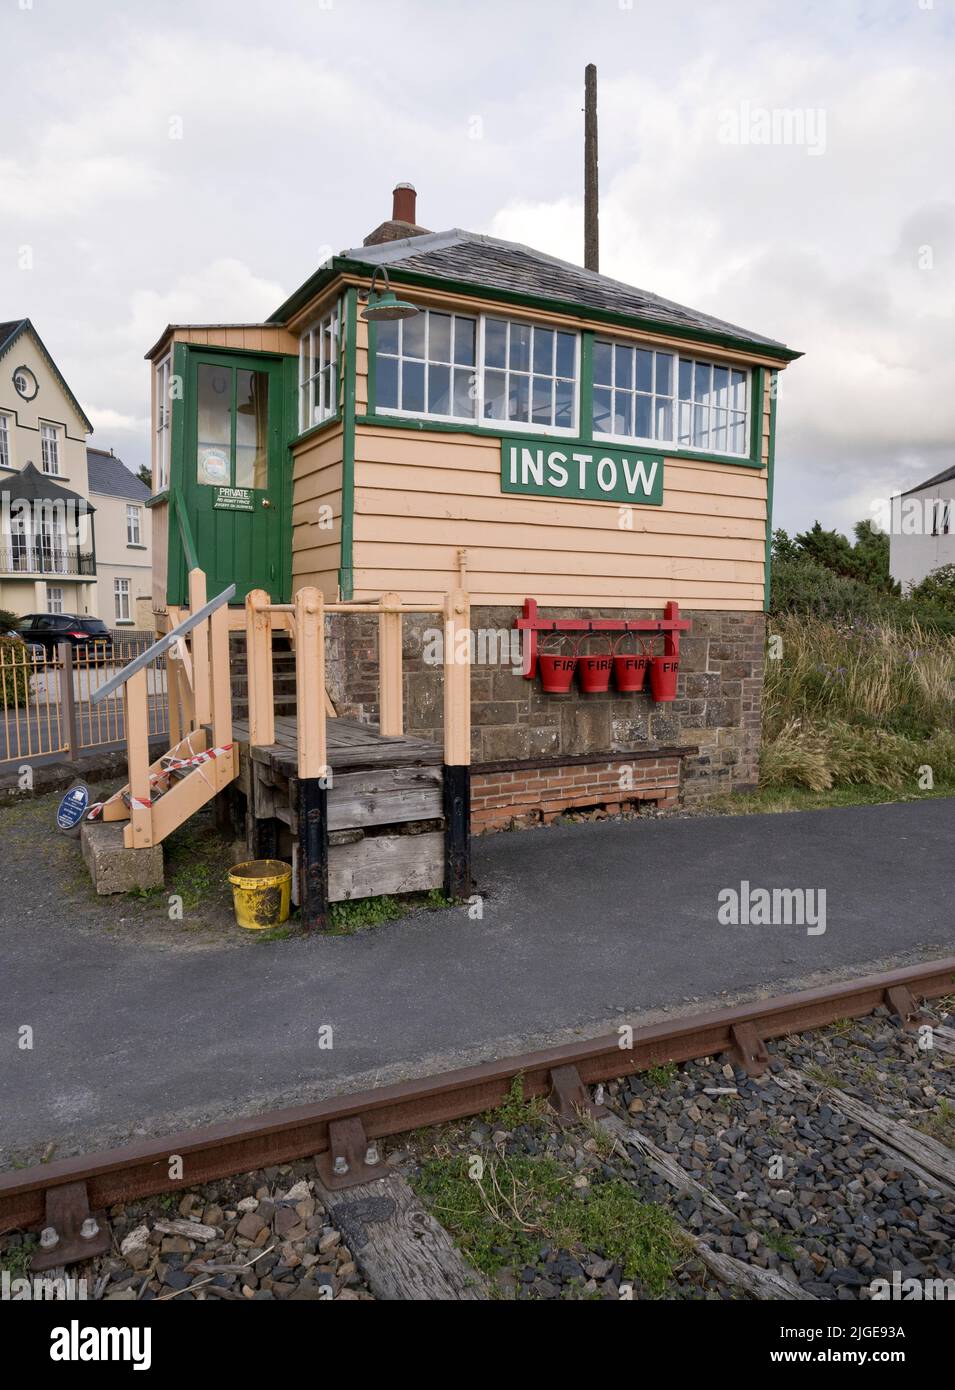 The old signal box at Instow, Devon, UK. The railway line is now part of the Tarka Trail cycling and walking route. Stock Photo